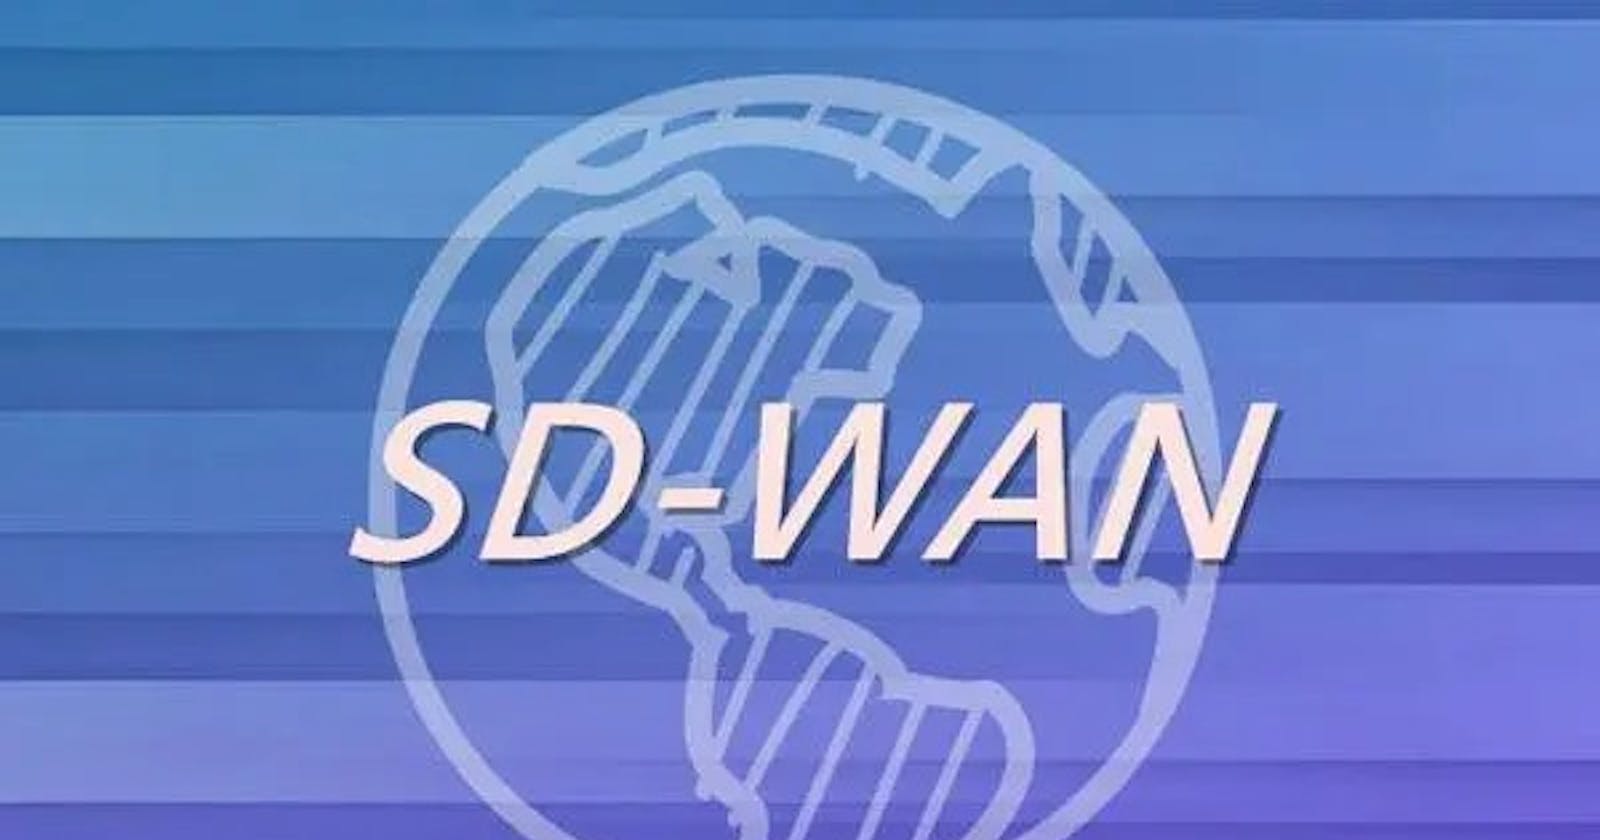 Evaluating the Three Key Functions of SD-WAN